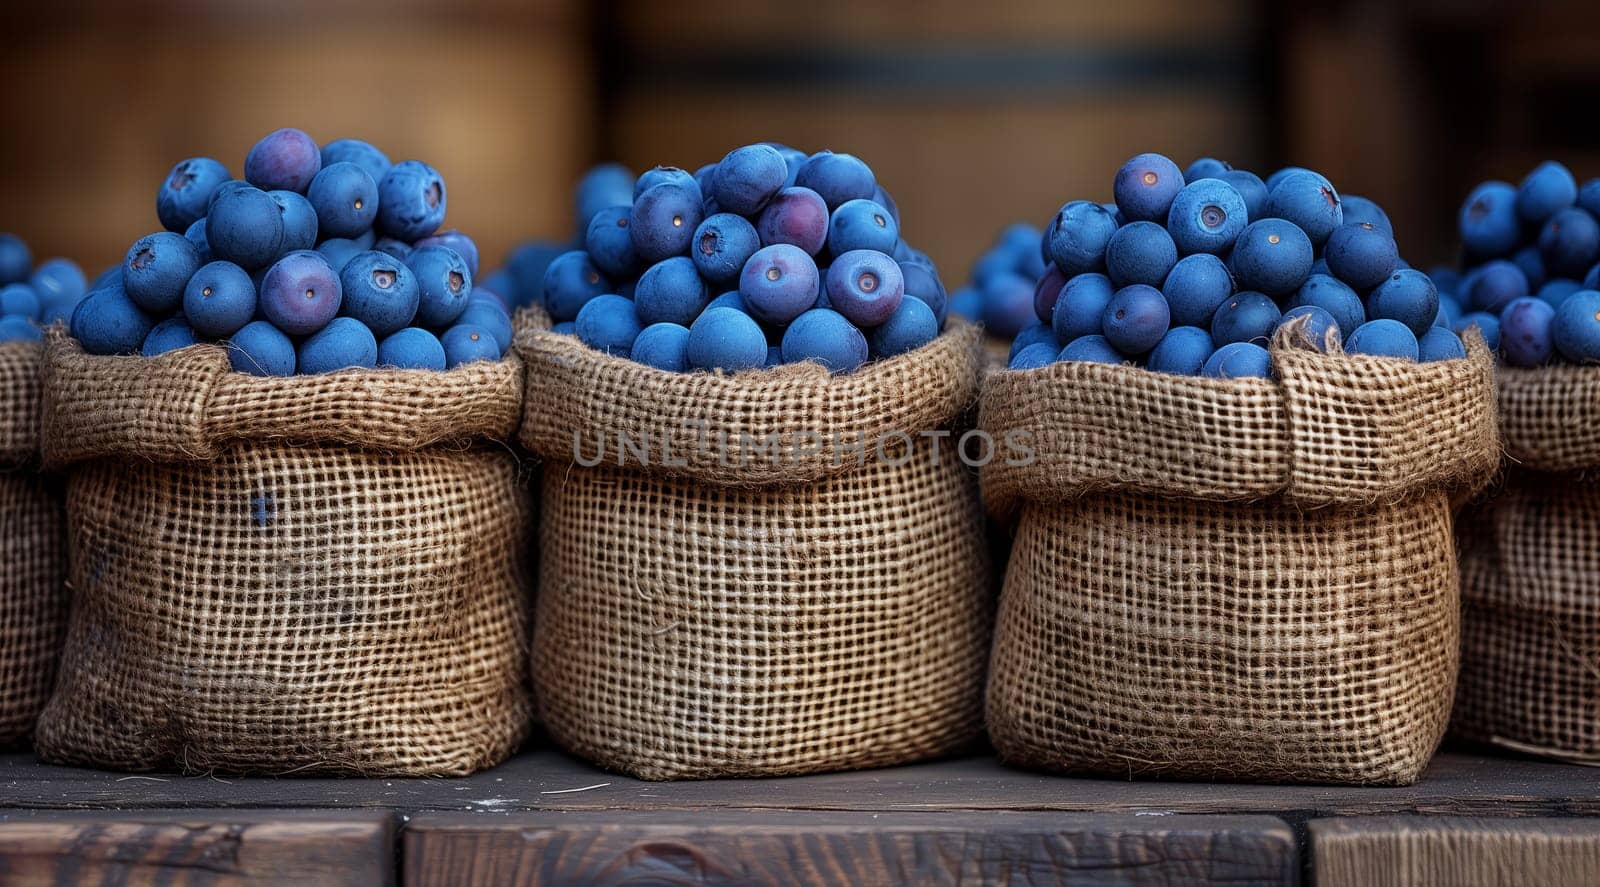 A row of storage baskets filled with electric blue blueberries on a wooden table at the local food market